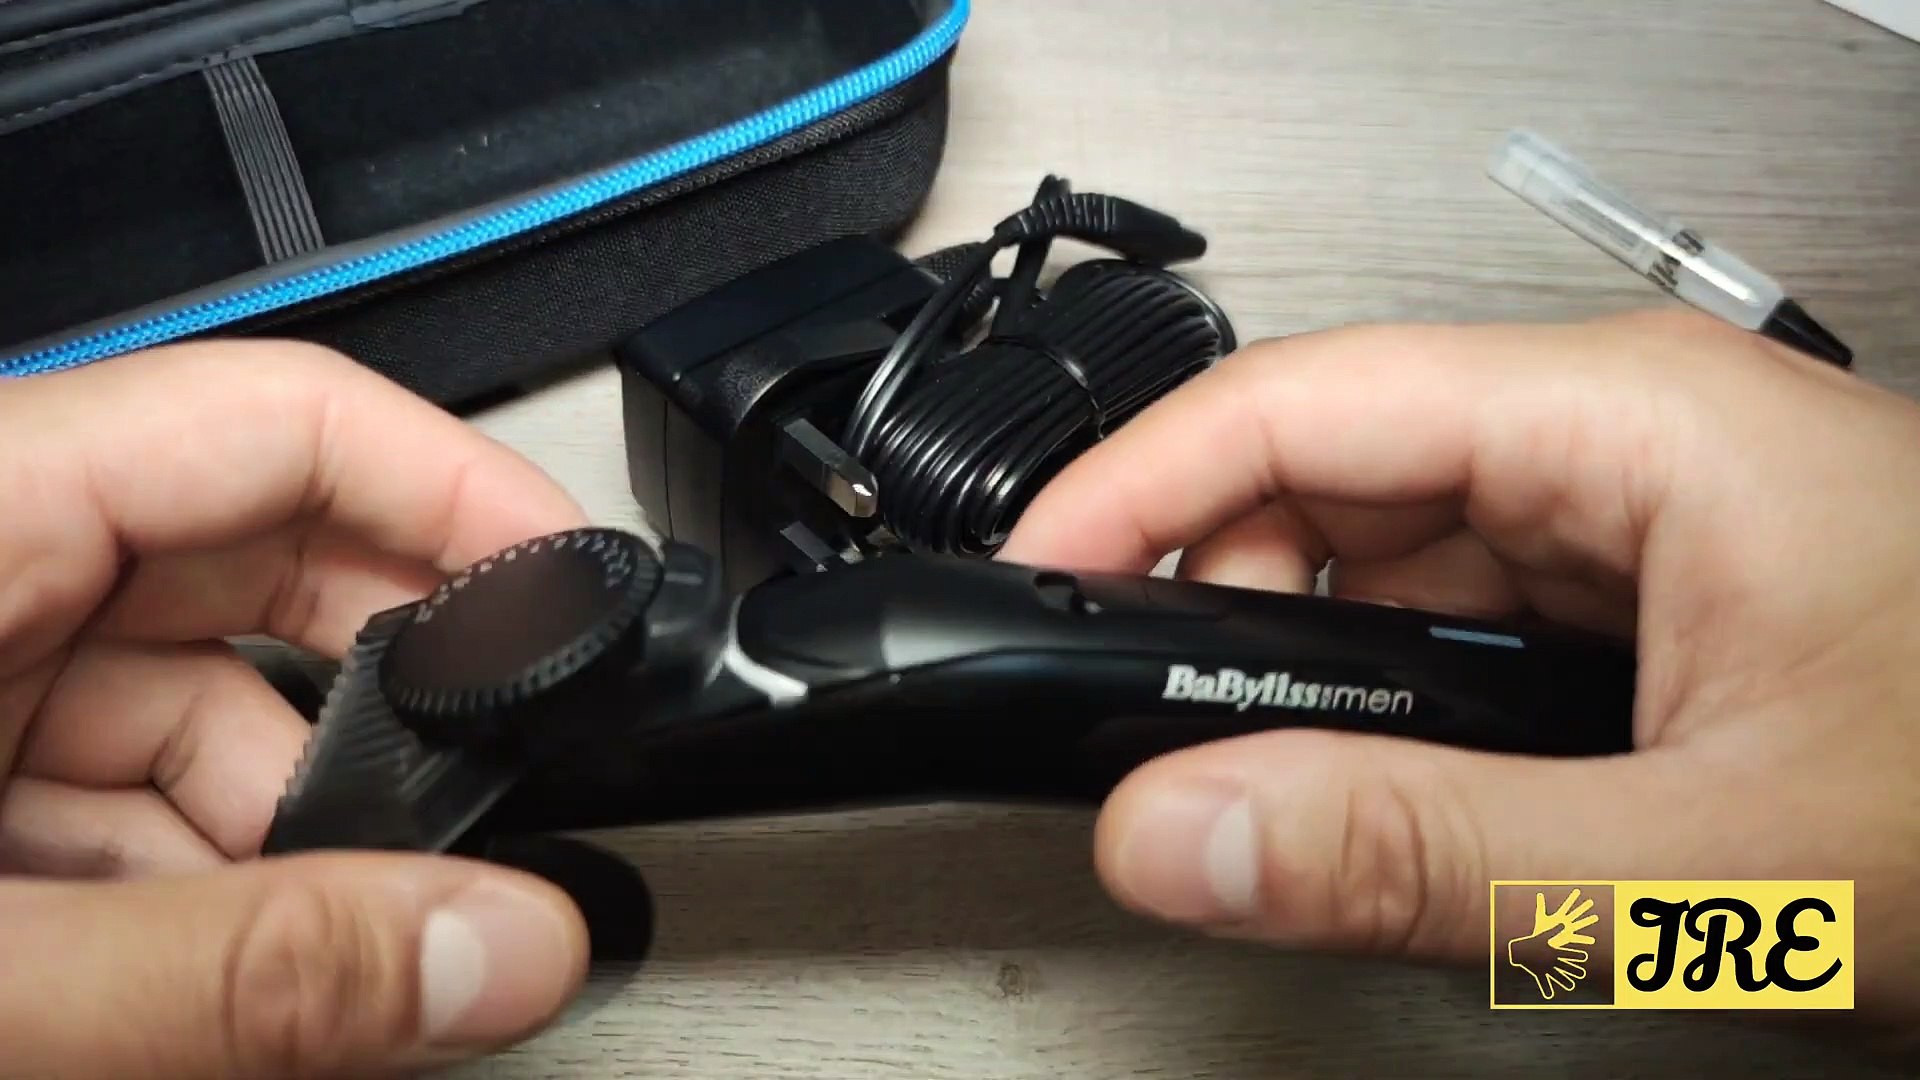 Babyliss Pro Beard Trimmer 7860U (Review) - video Dailymotion